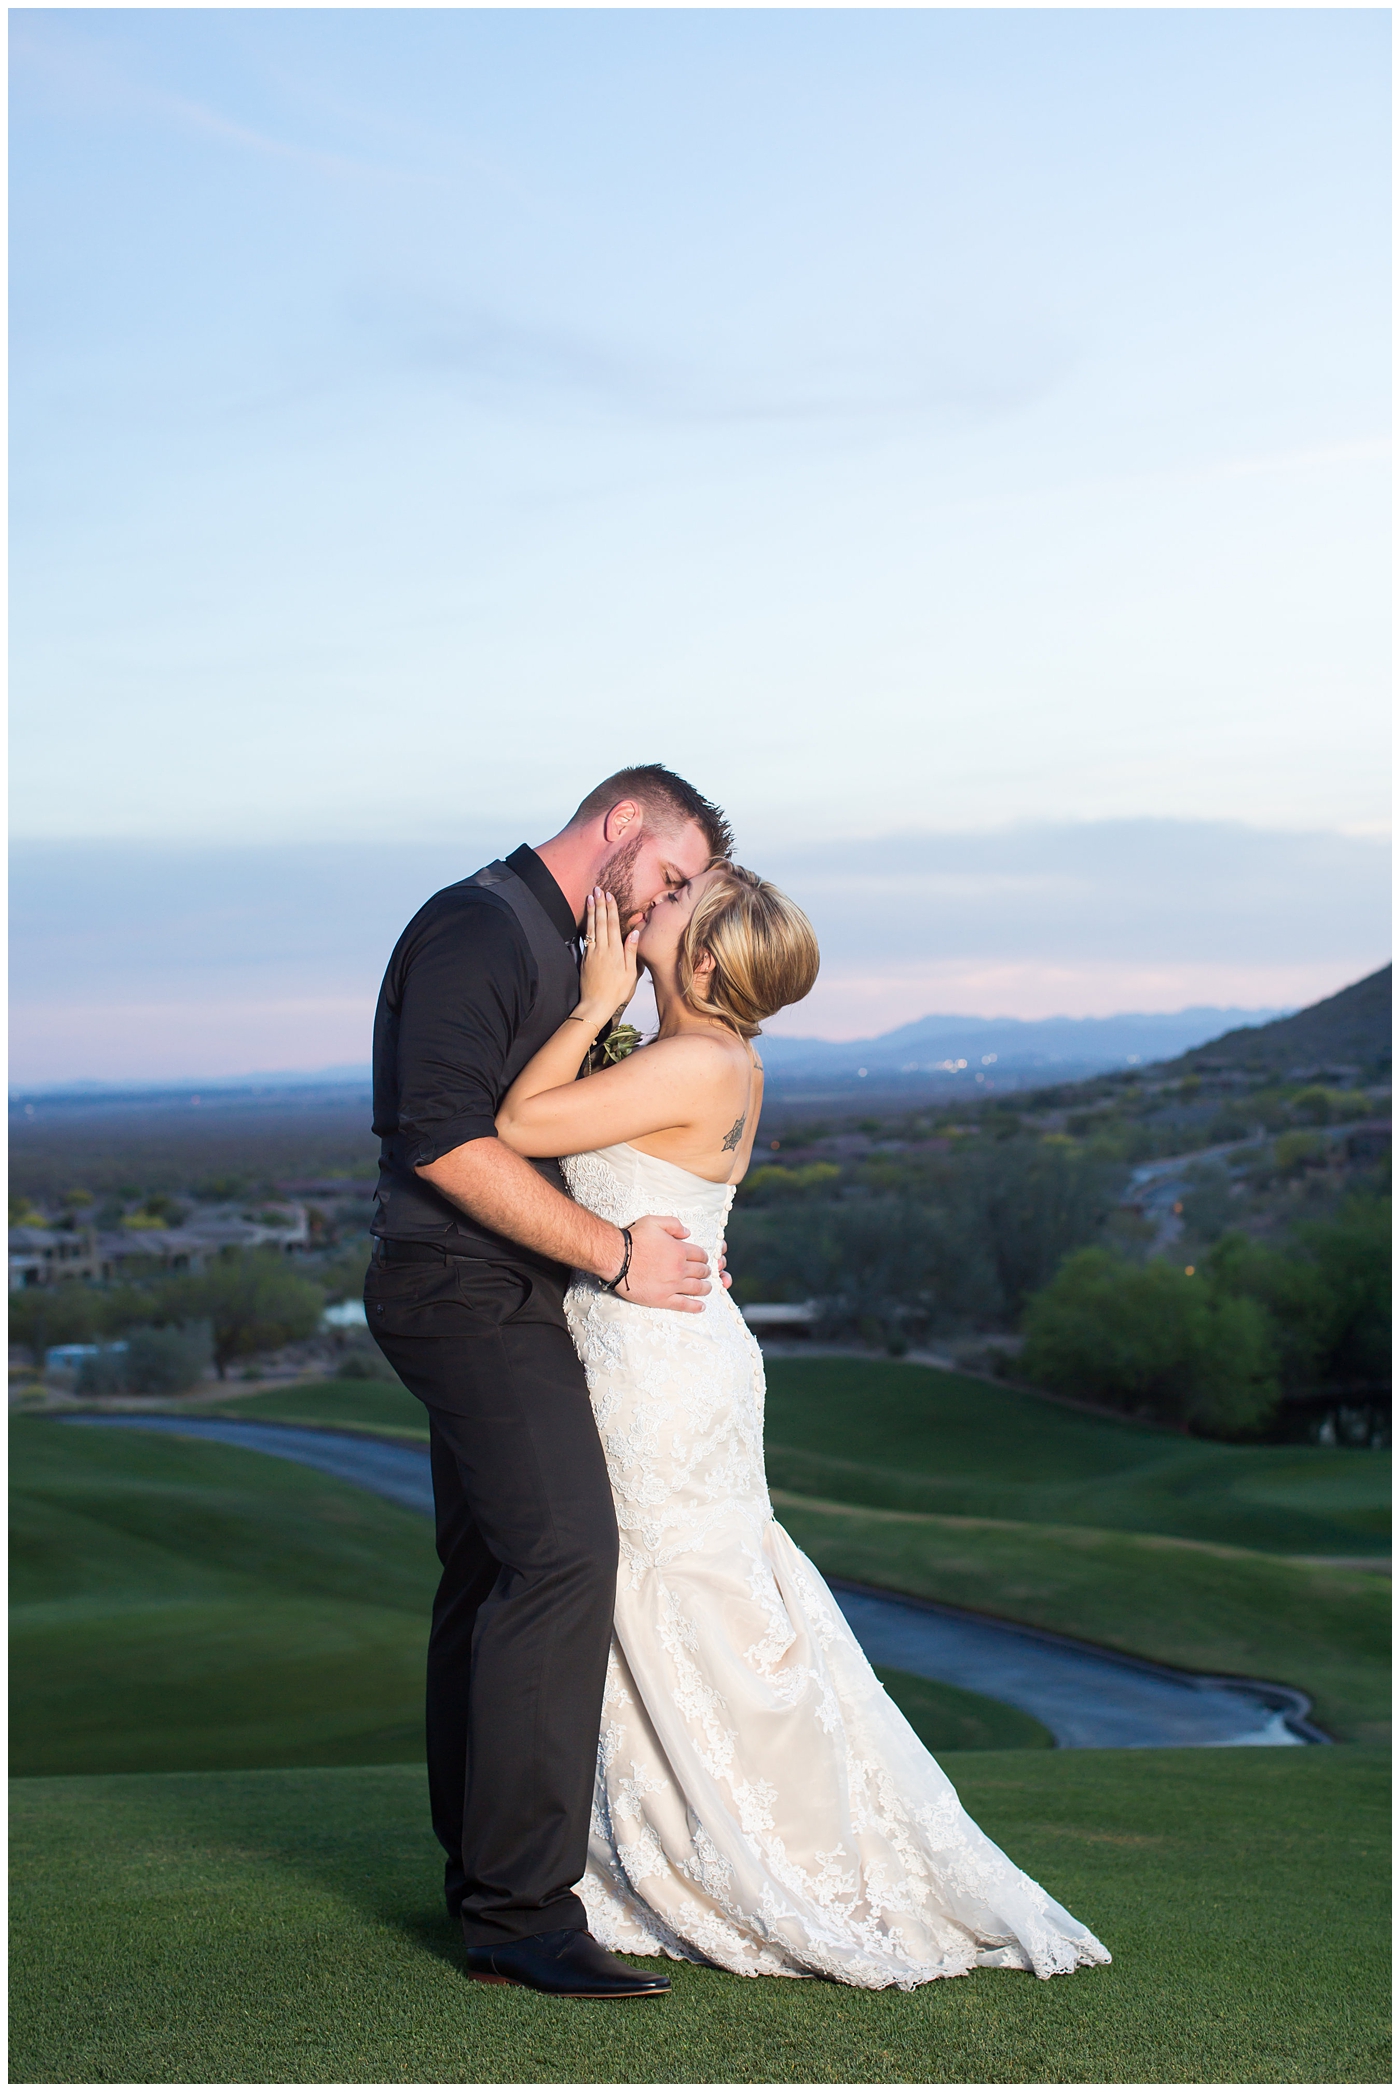 bride with fishtail braid and strapless dress with white rose and greenery bouquet with groom in black pants and vest and tie with rolled up shirt sleeves with succulent boutonniere wedding day portrait at sunset